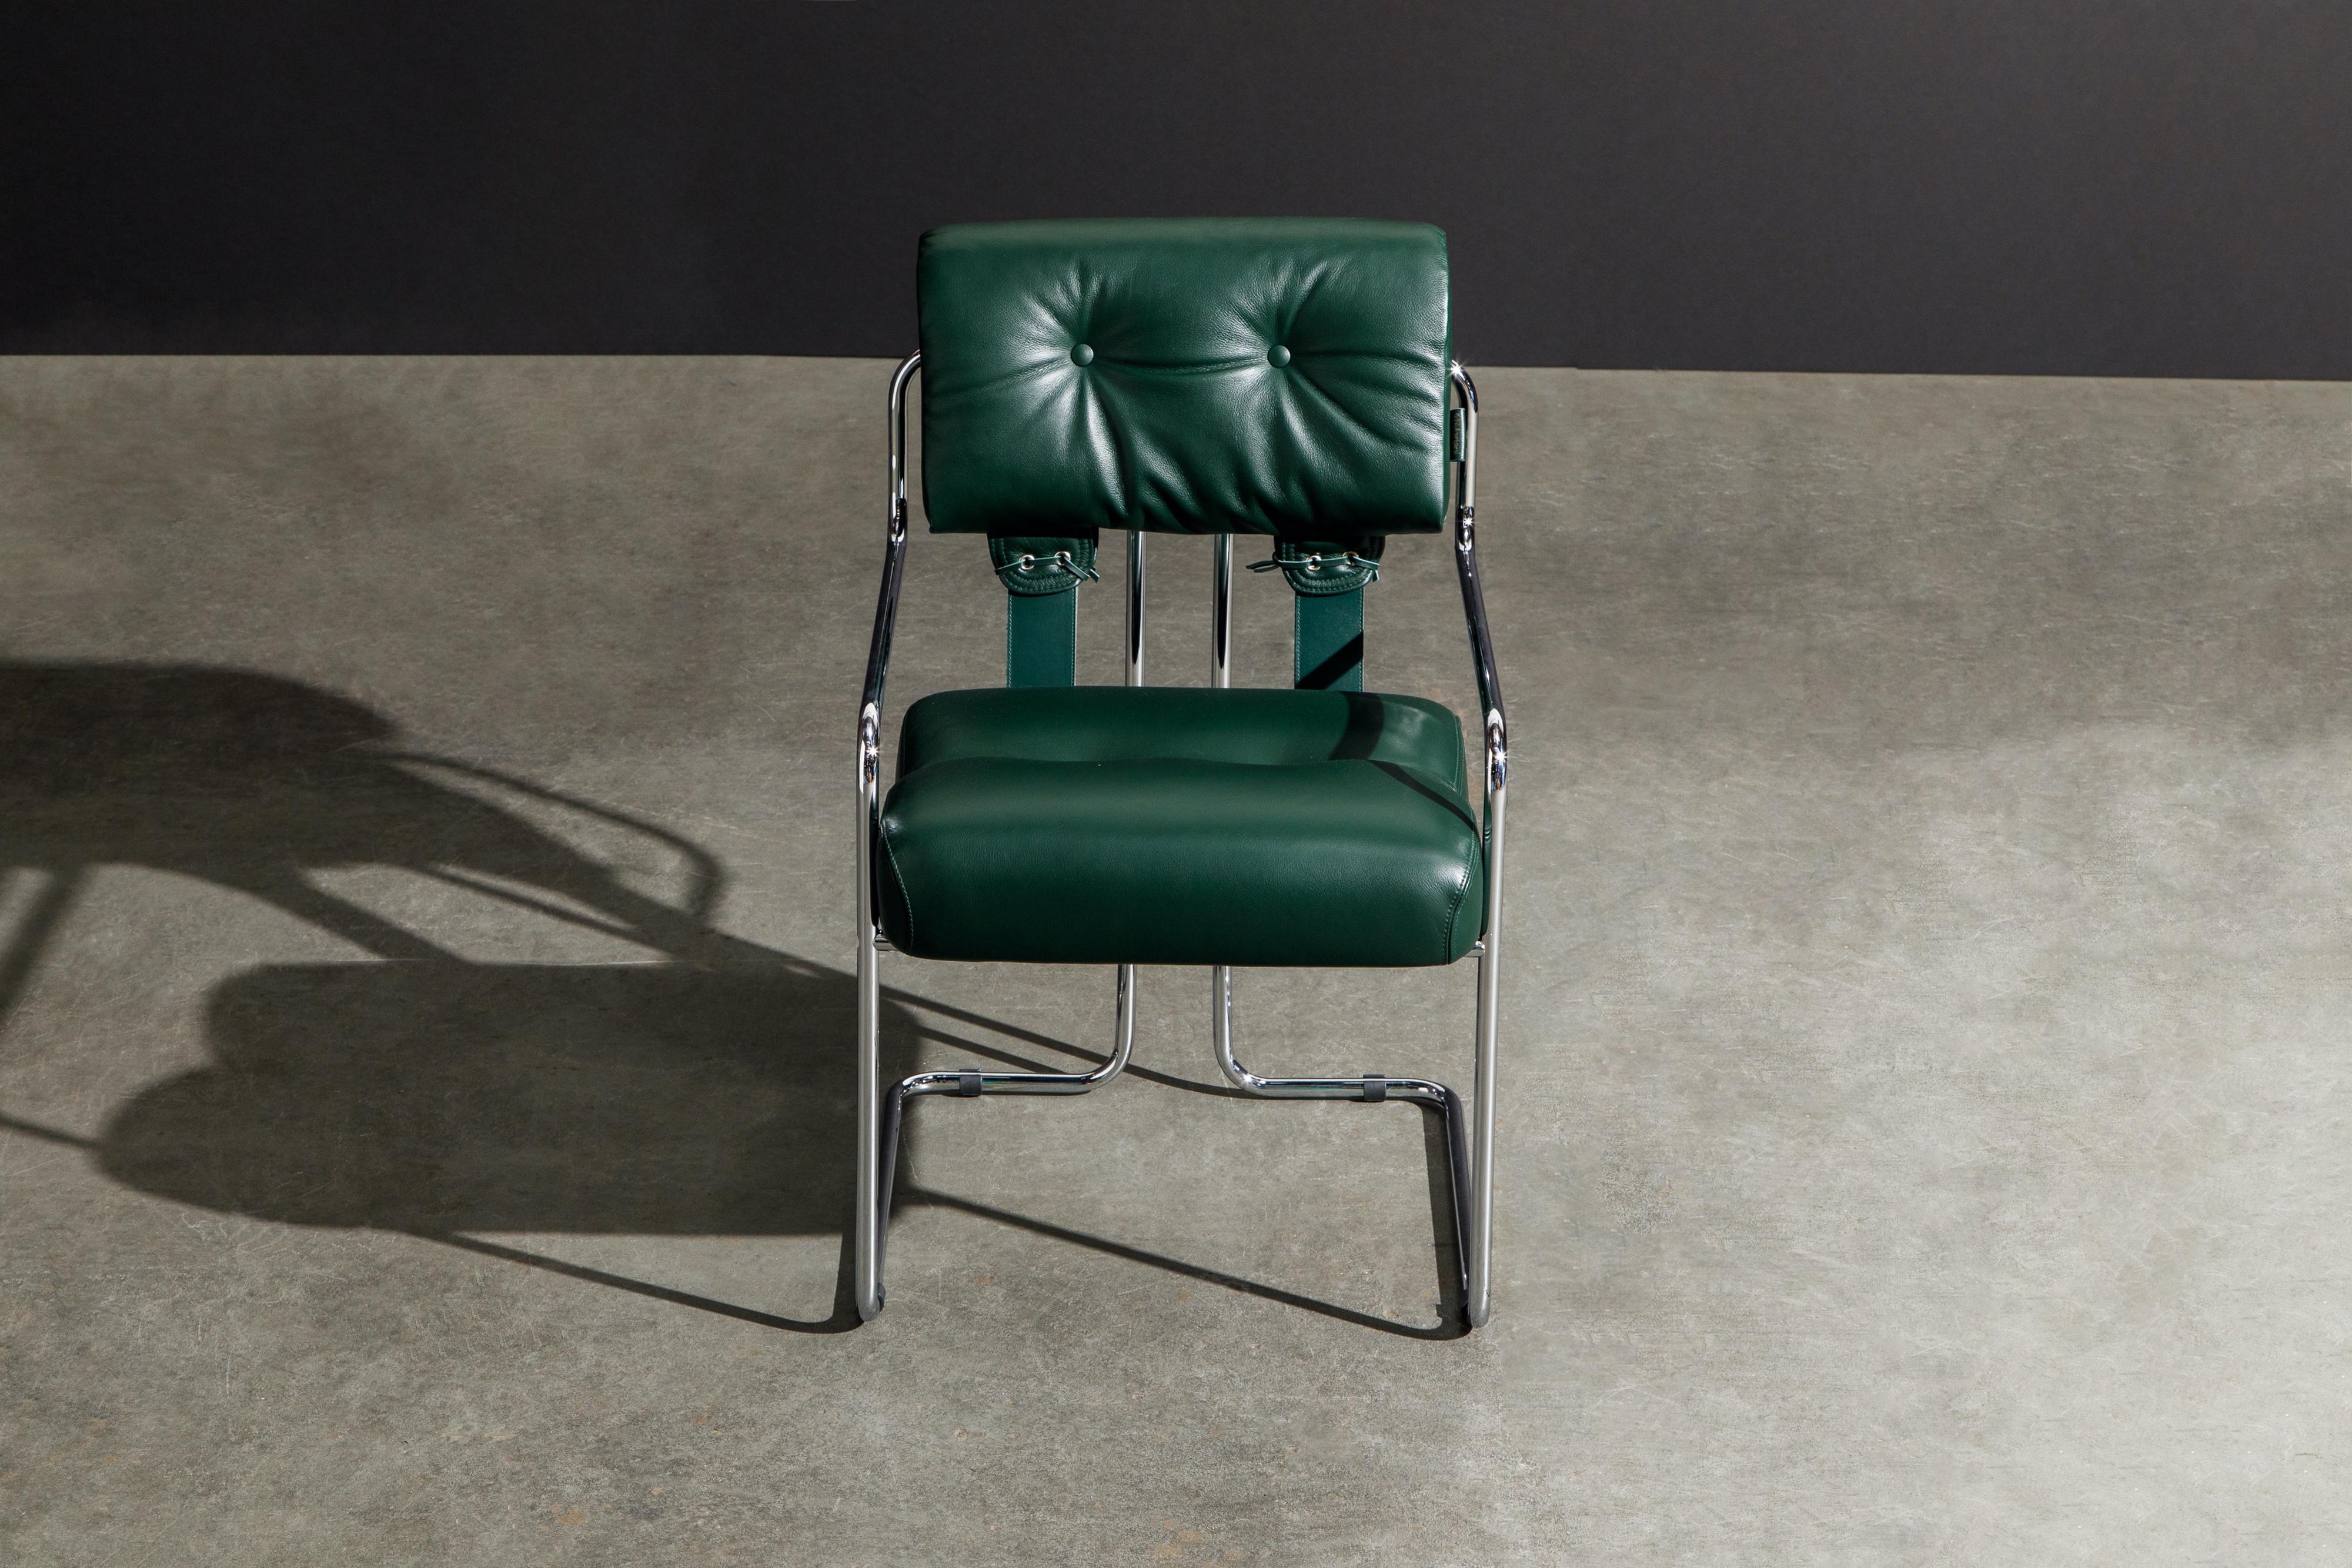 *Custom order listing for ALVIN*

Set of six Tucroma armchairs in beautiful emerald green leather with polished chrome frames. The seats and backs have supple green leather upholstery and are attached to graceful polished steel tubular frames, as